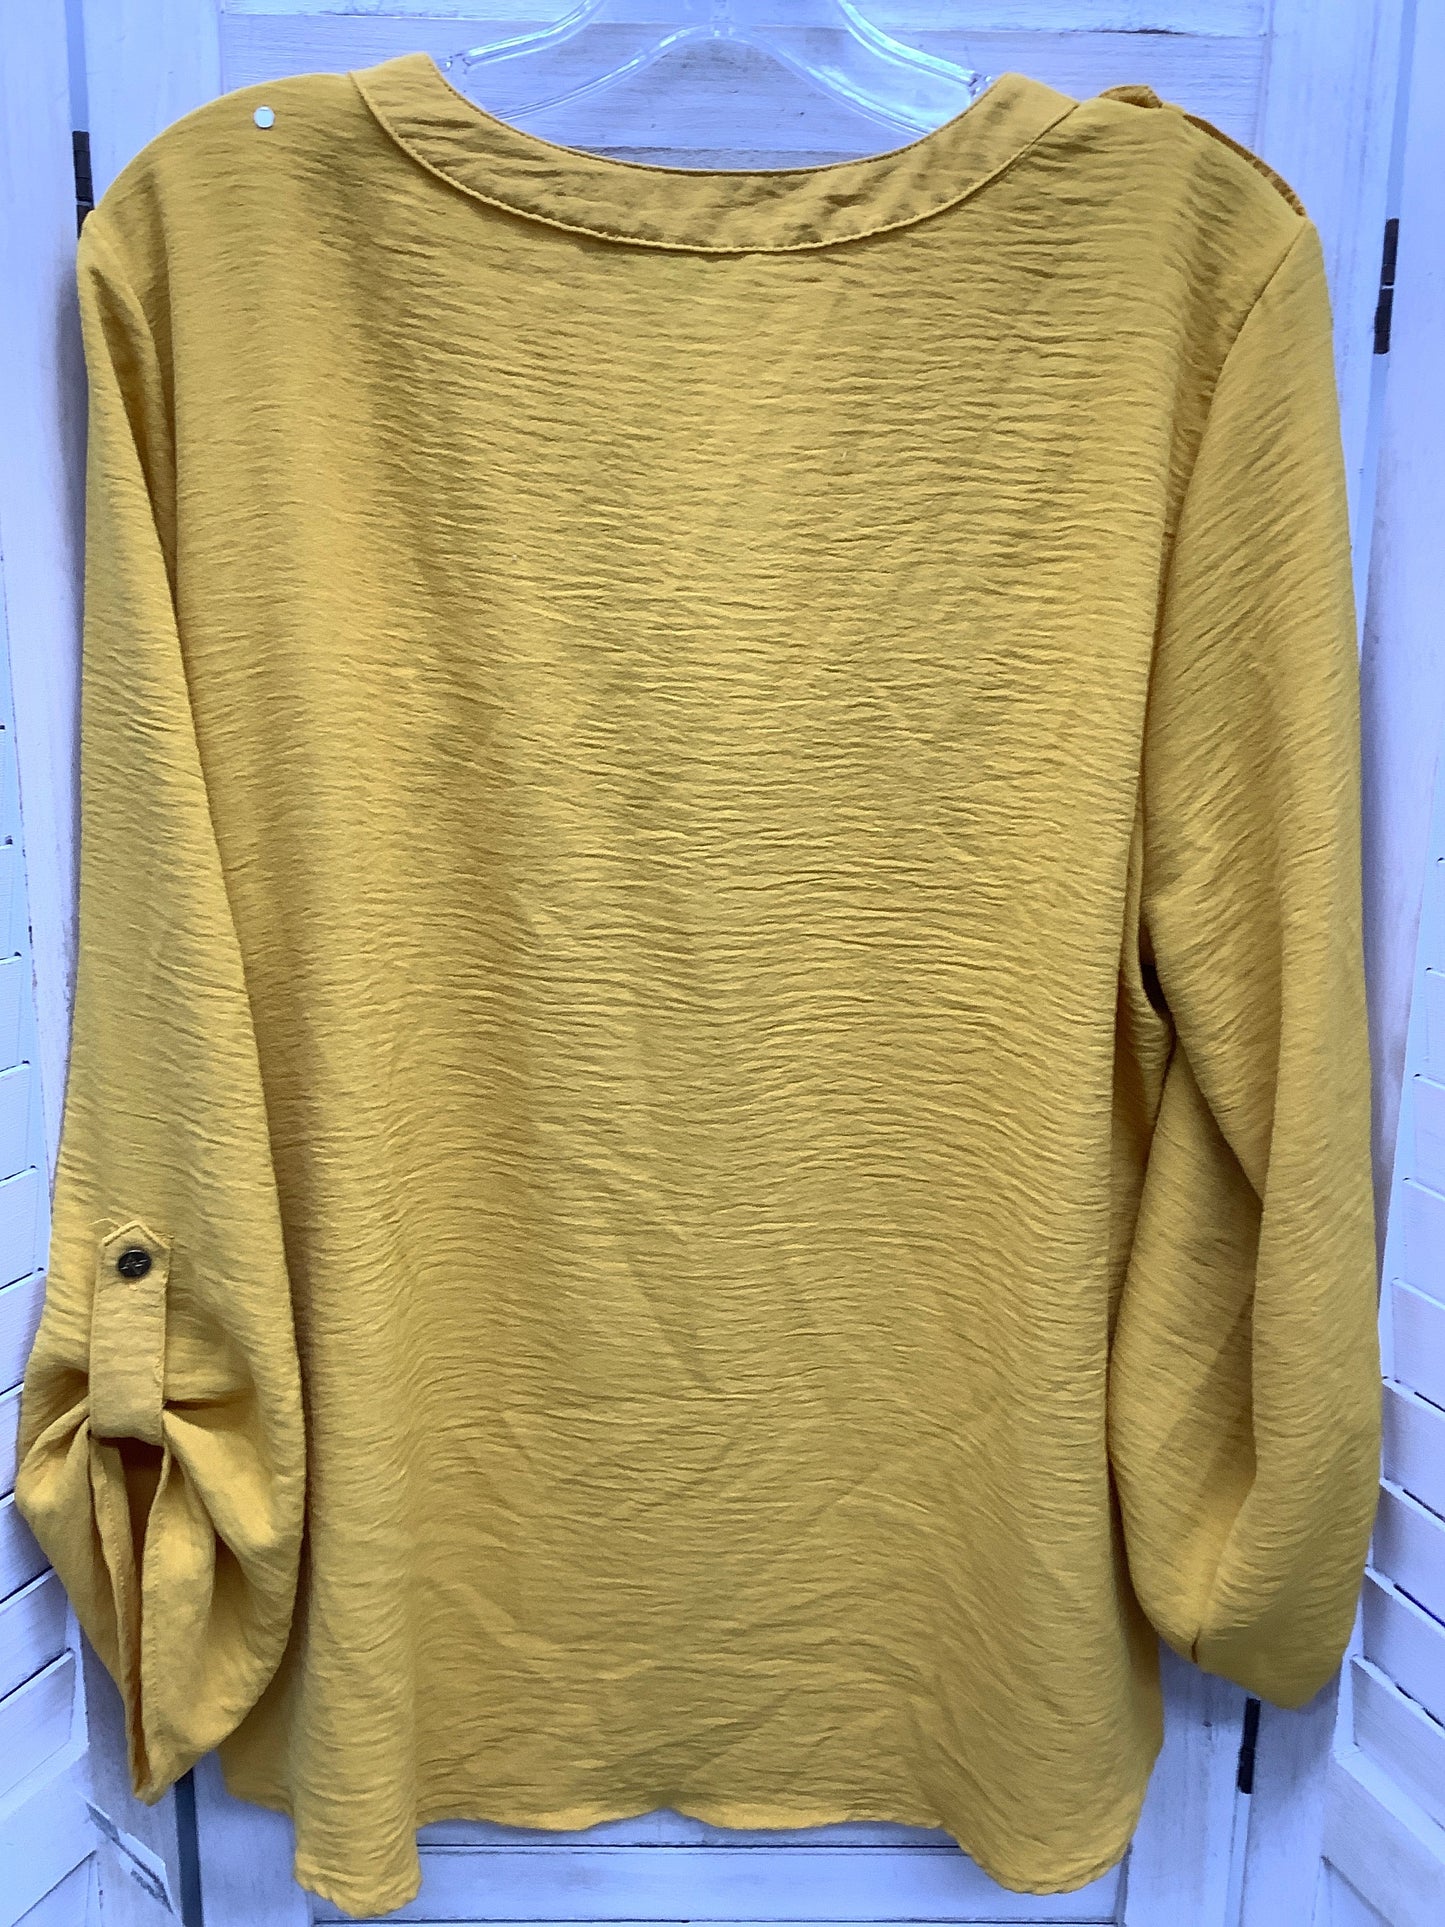 Yellow Top Long Sleeve Adrienne Vittadini, Size L